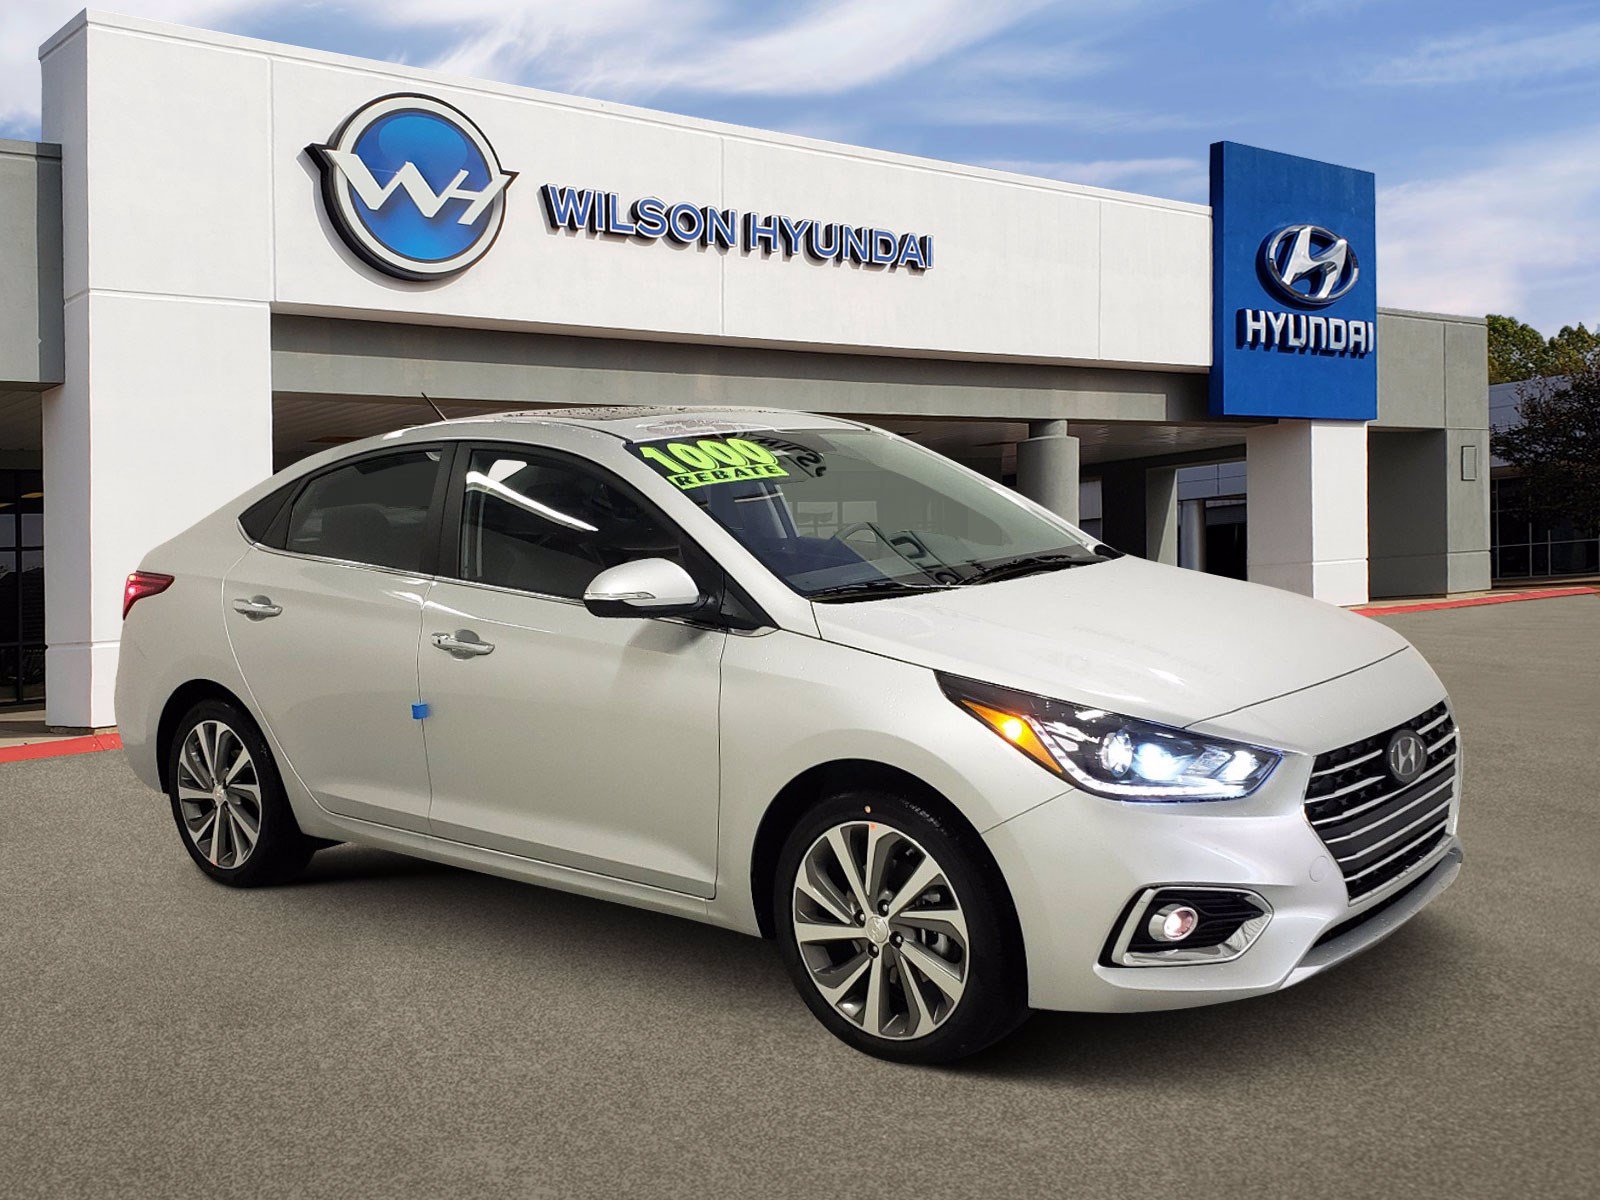 New 2019 Hyundai Accent Limited 4dr Car in Jackson, MS 39232 #H057701 ...